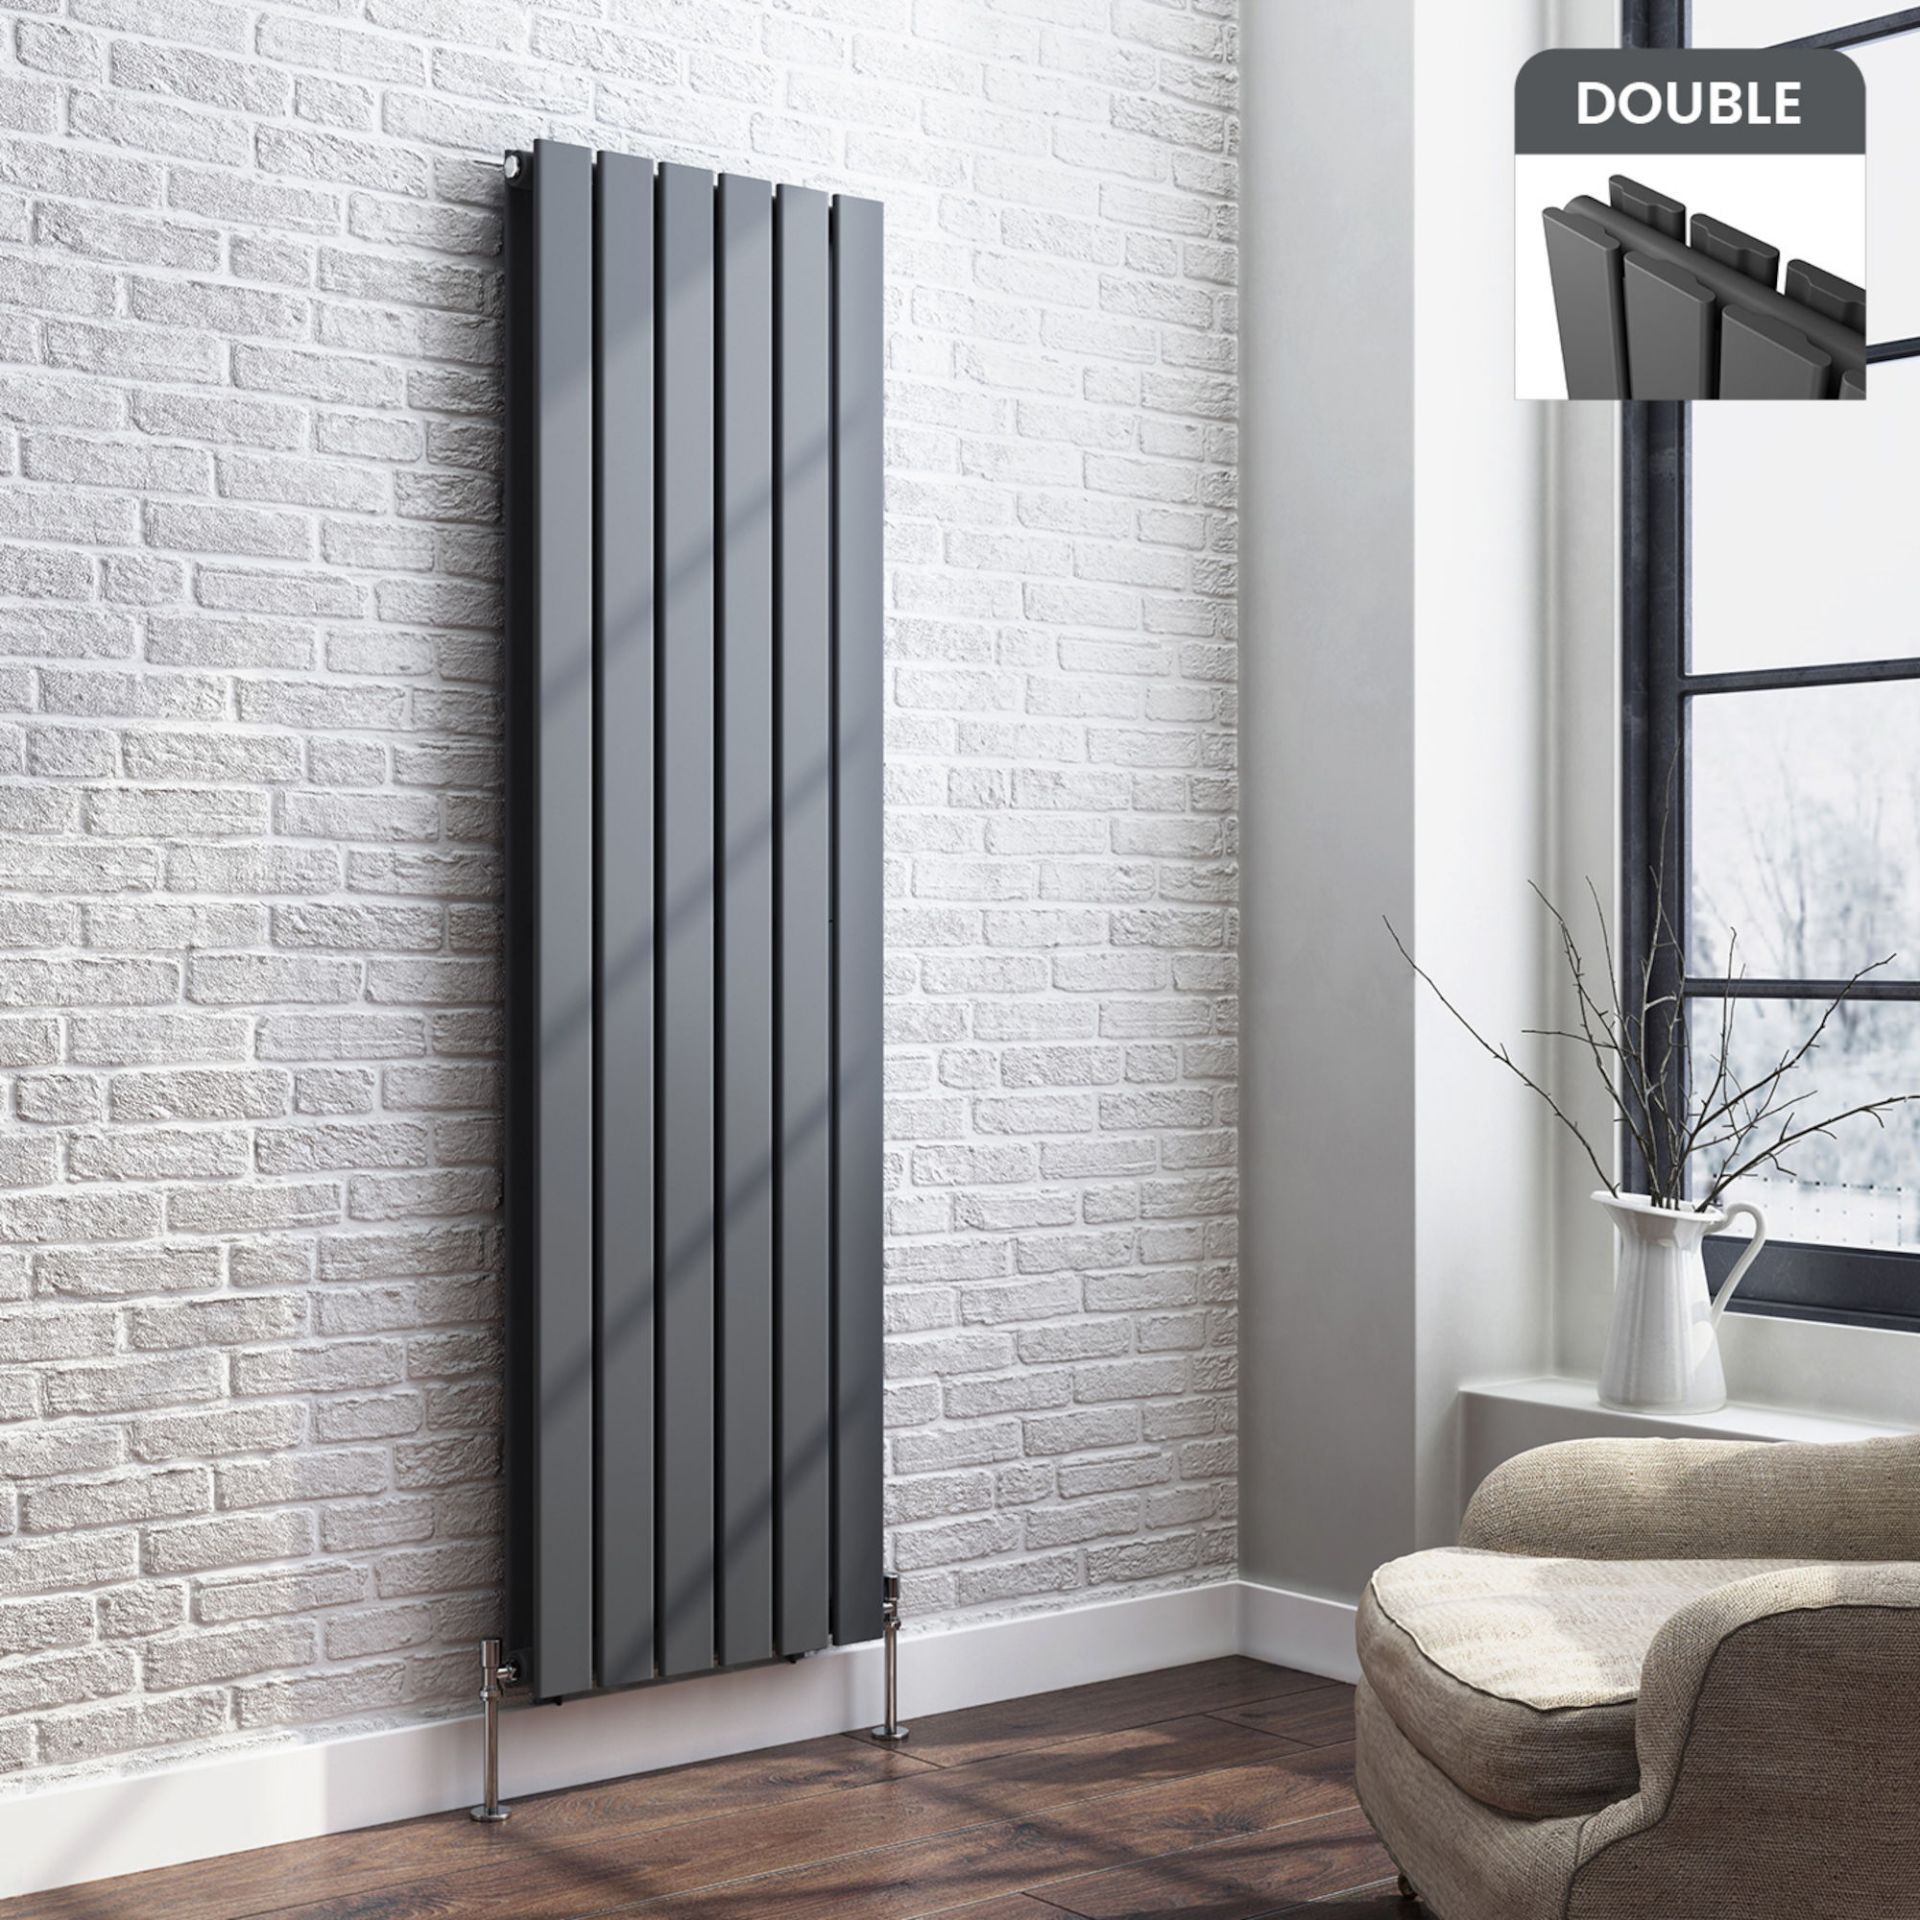 (XM142) 1600x452mm Anthracite Double Flat Panel Vertical Radiator. RRP £449.99. Made with low carbon